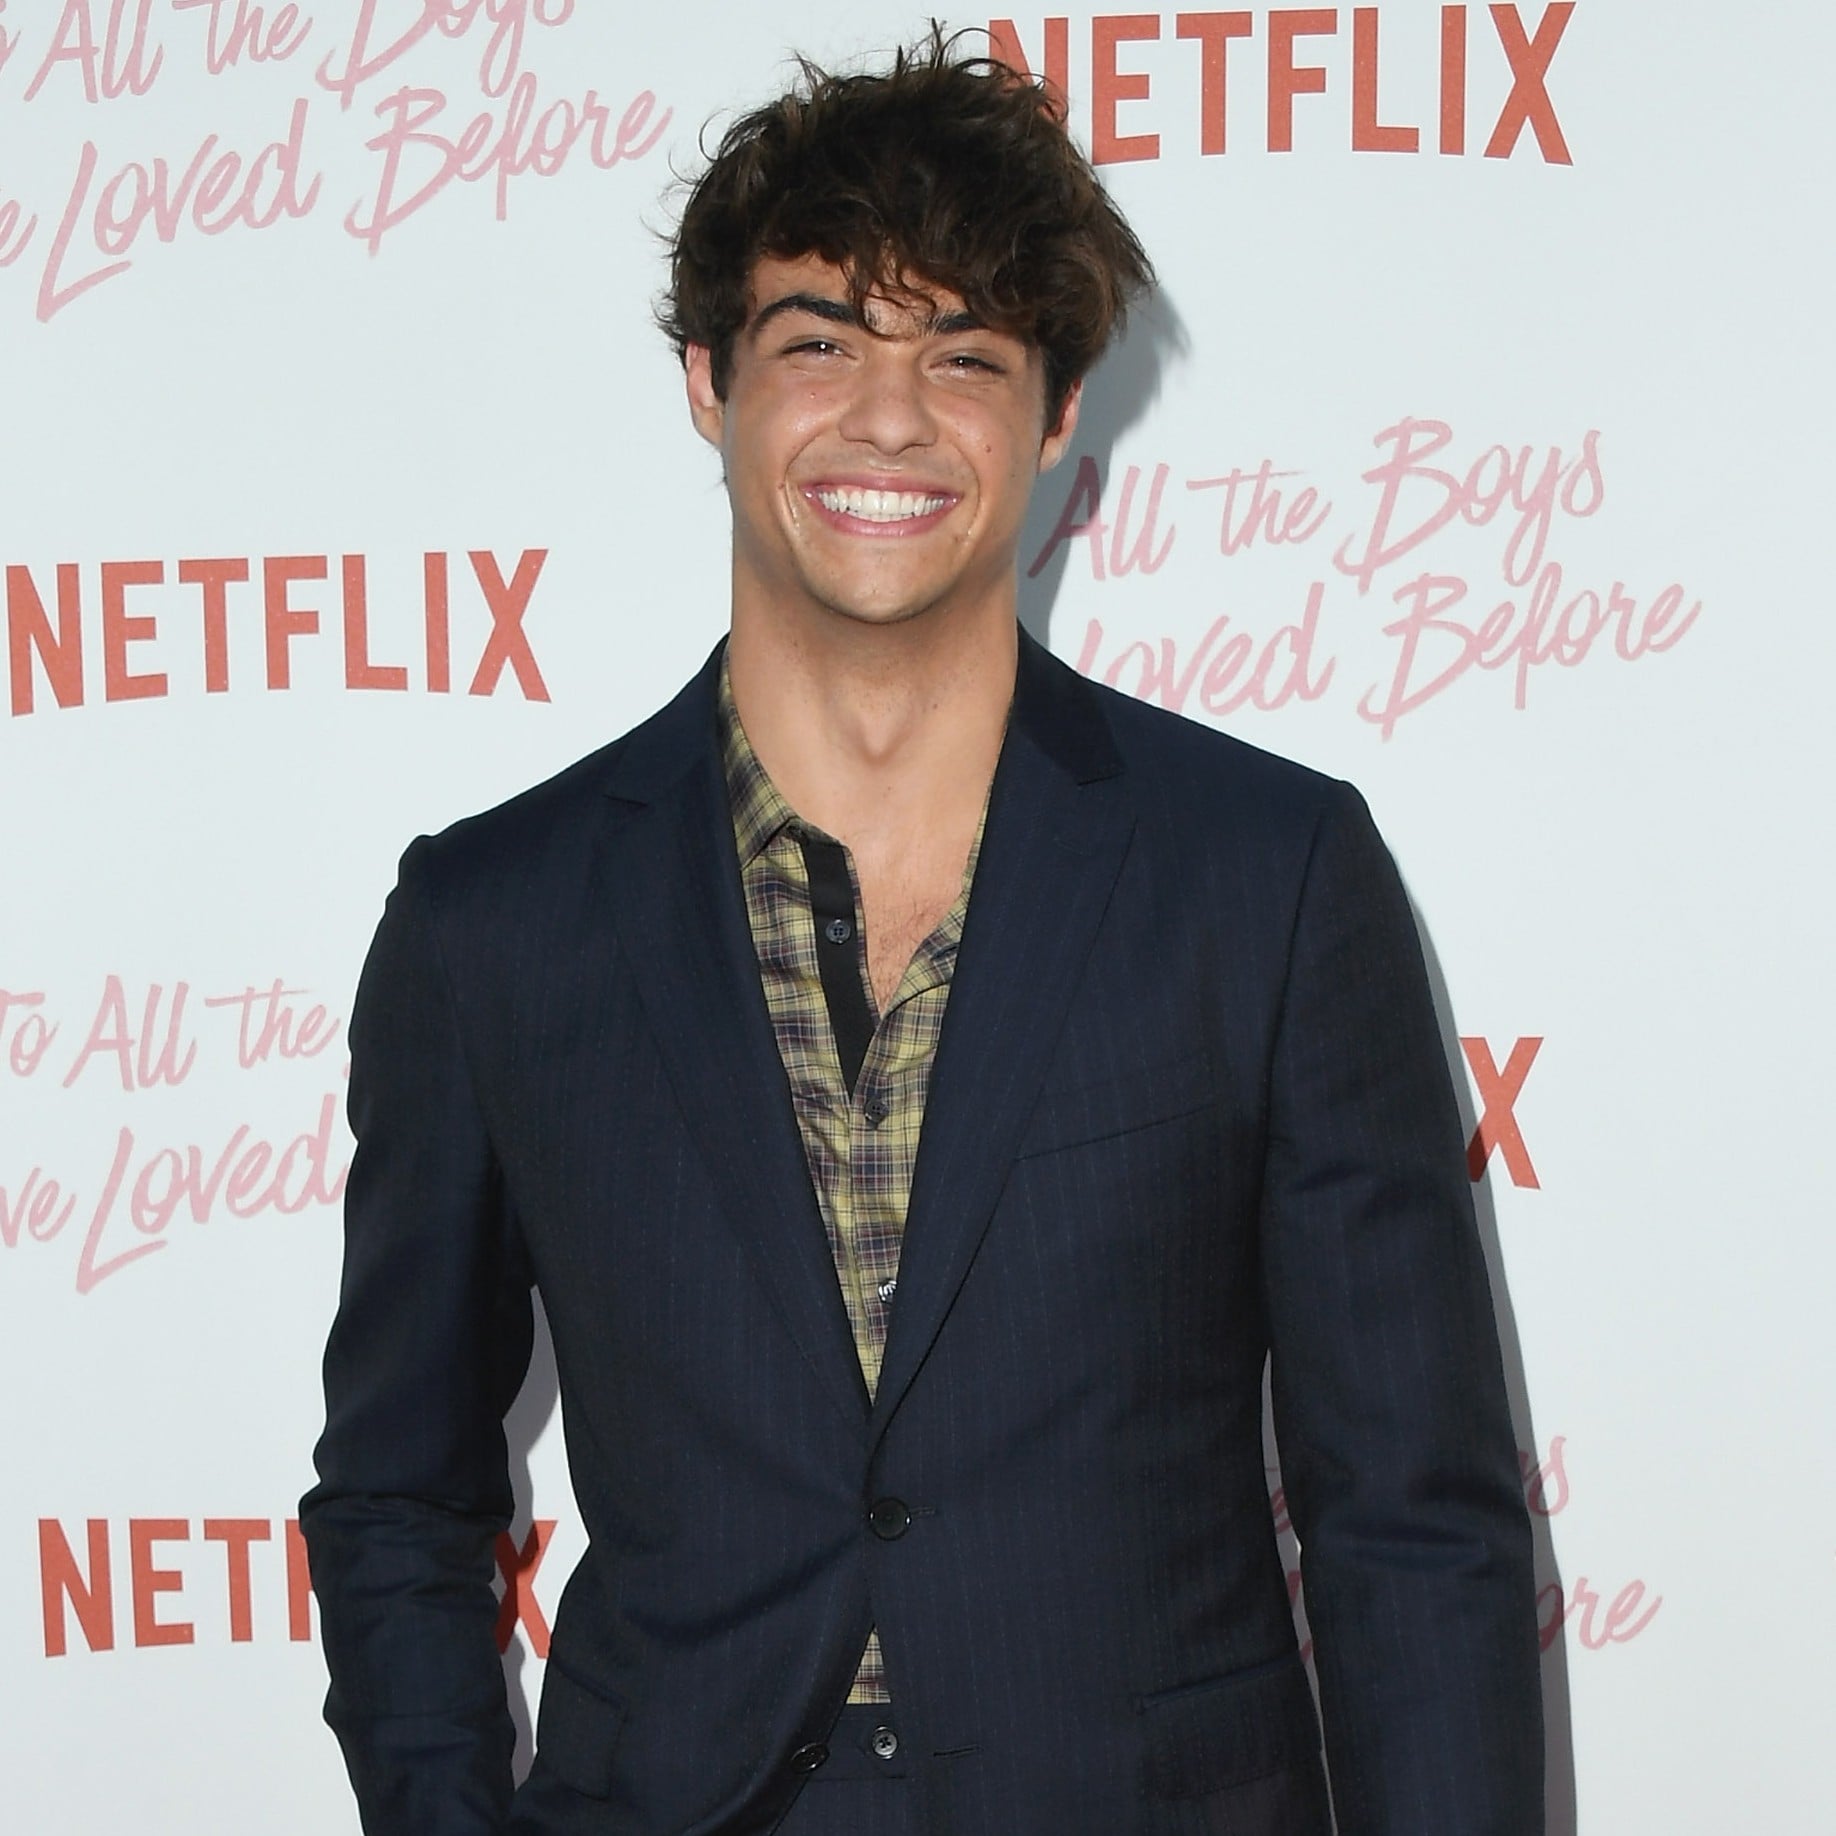 Noah Centineo Explains How He Got His Scar in a Pretty Ironic Way.